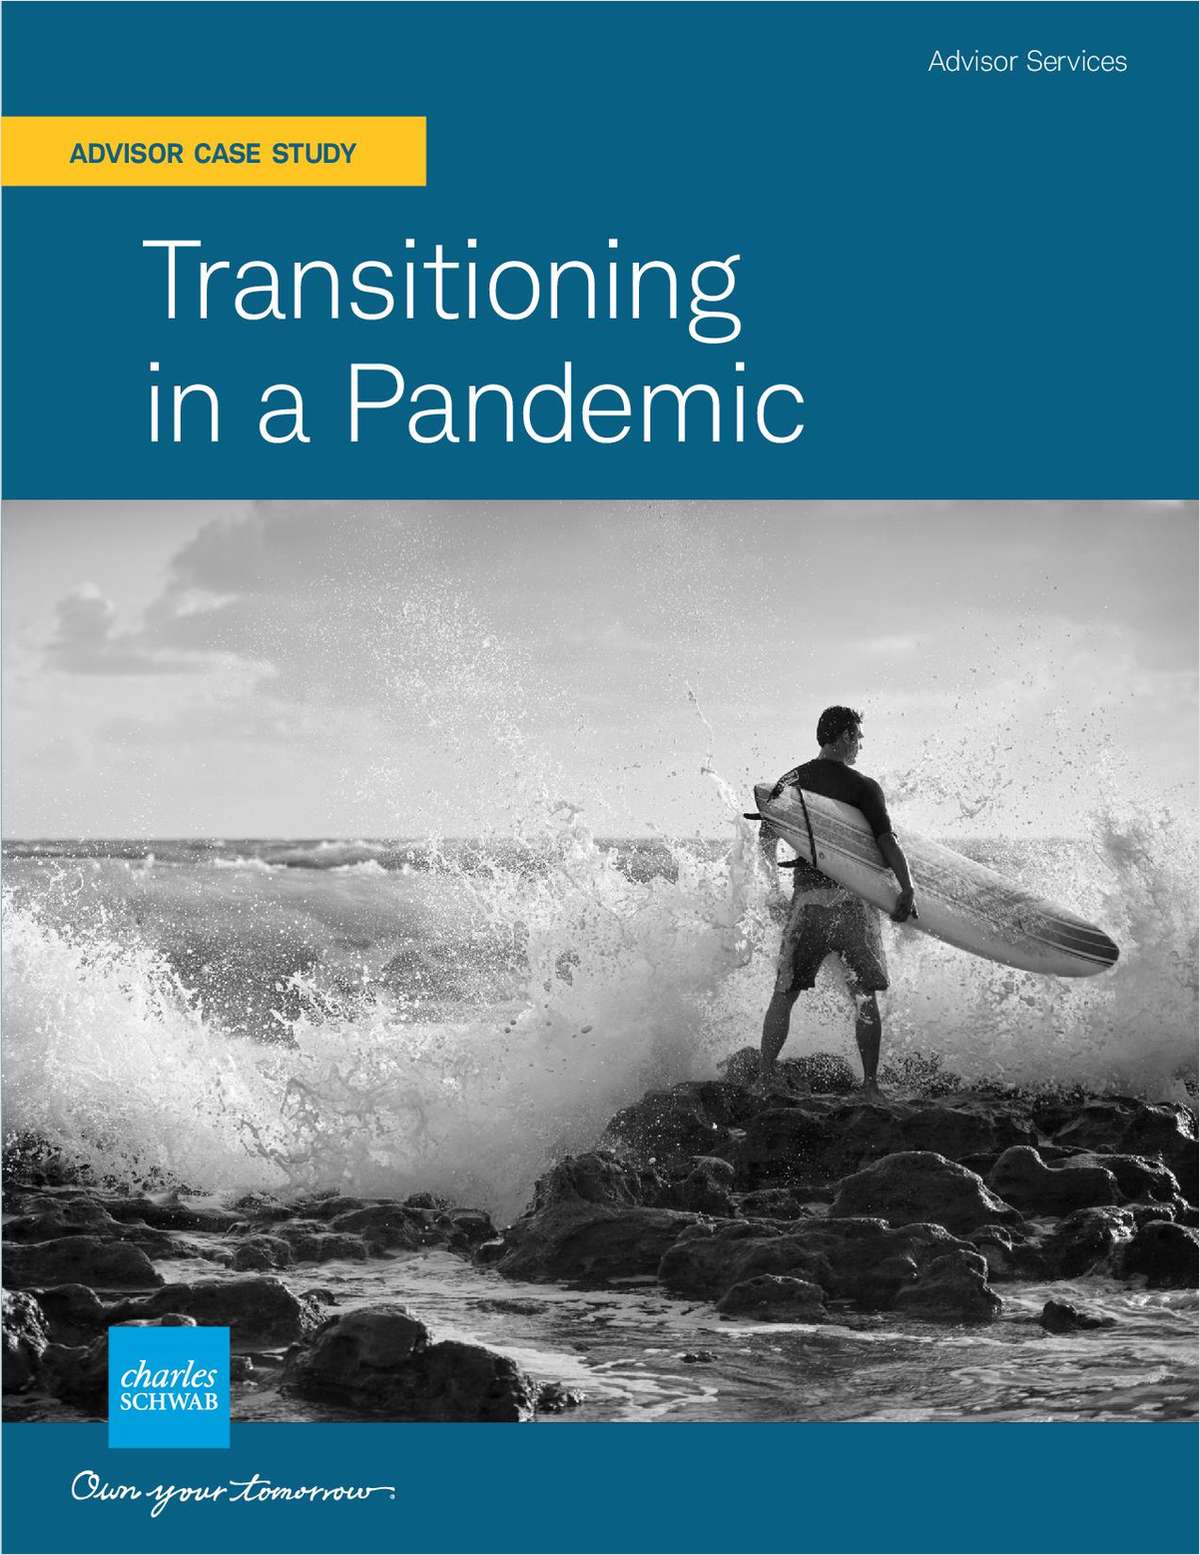 w schw290c8 - Advisor Case Study: Transitioning in a Pandemic